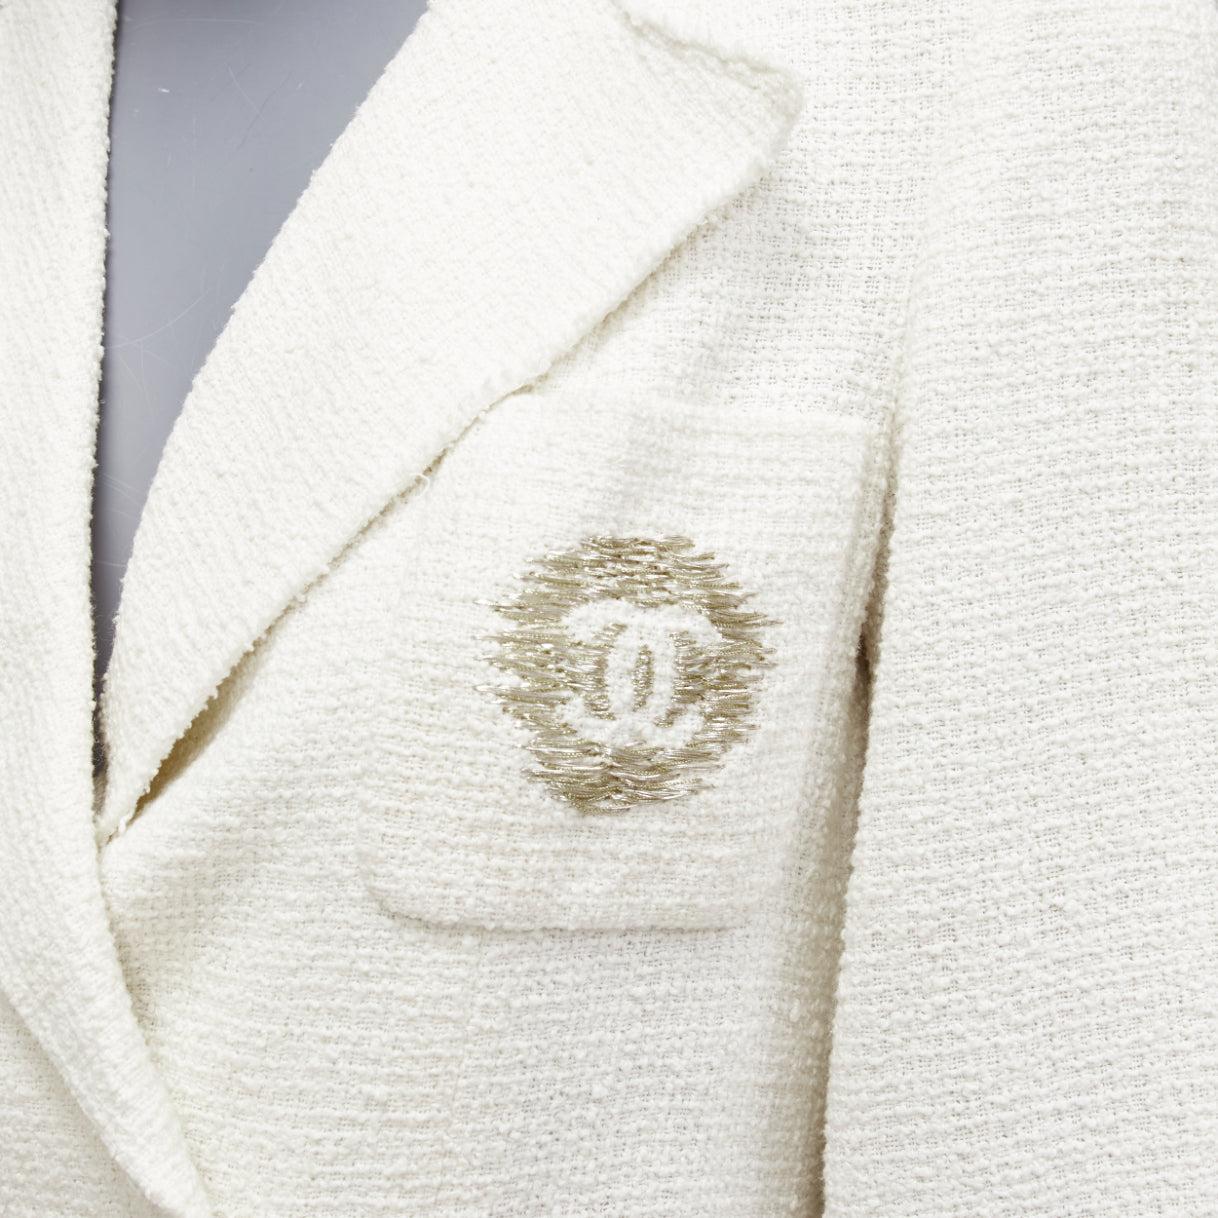 CHANEL white cotton tweed CC embroidery pocket cropped schoolboy jacket FR36 S
Reference: LNKO/A02286
Brand: Chanel
Designer: Karl Lagerfeld
Material: Cotton
Color: White, Gold
Pattern: Solid
Closure: Button
Lining: Cream Silk
Extra Details: CC logo